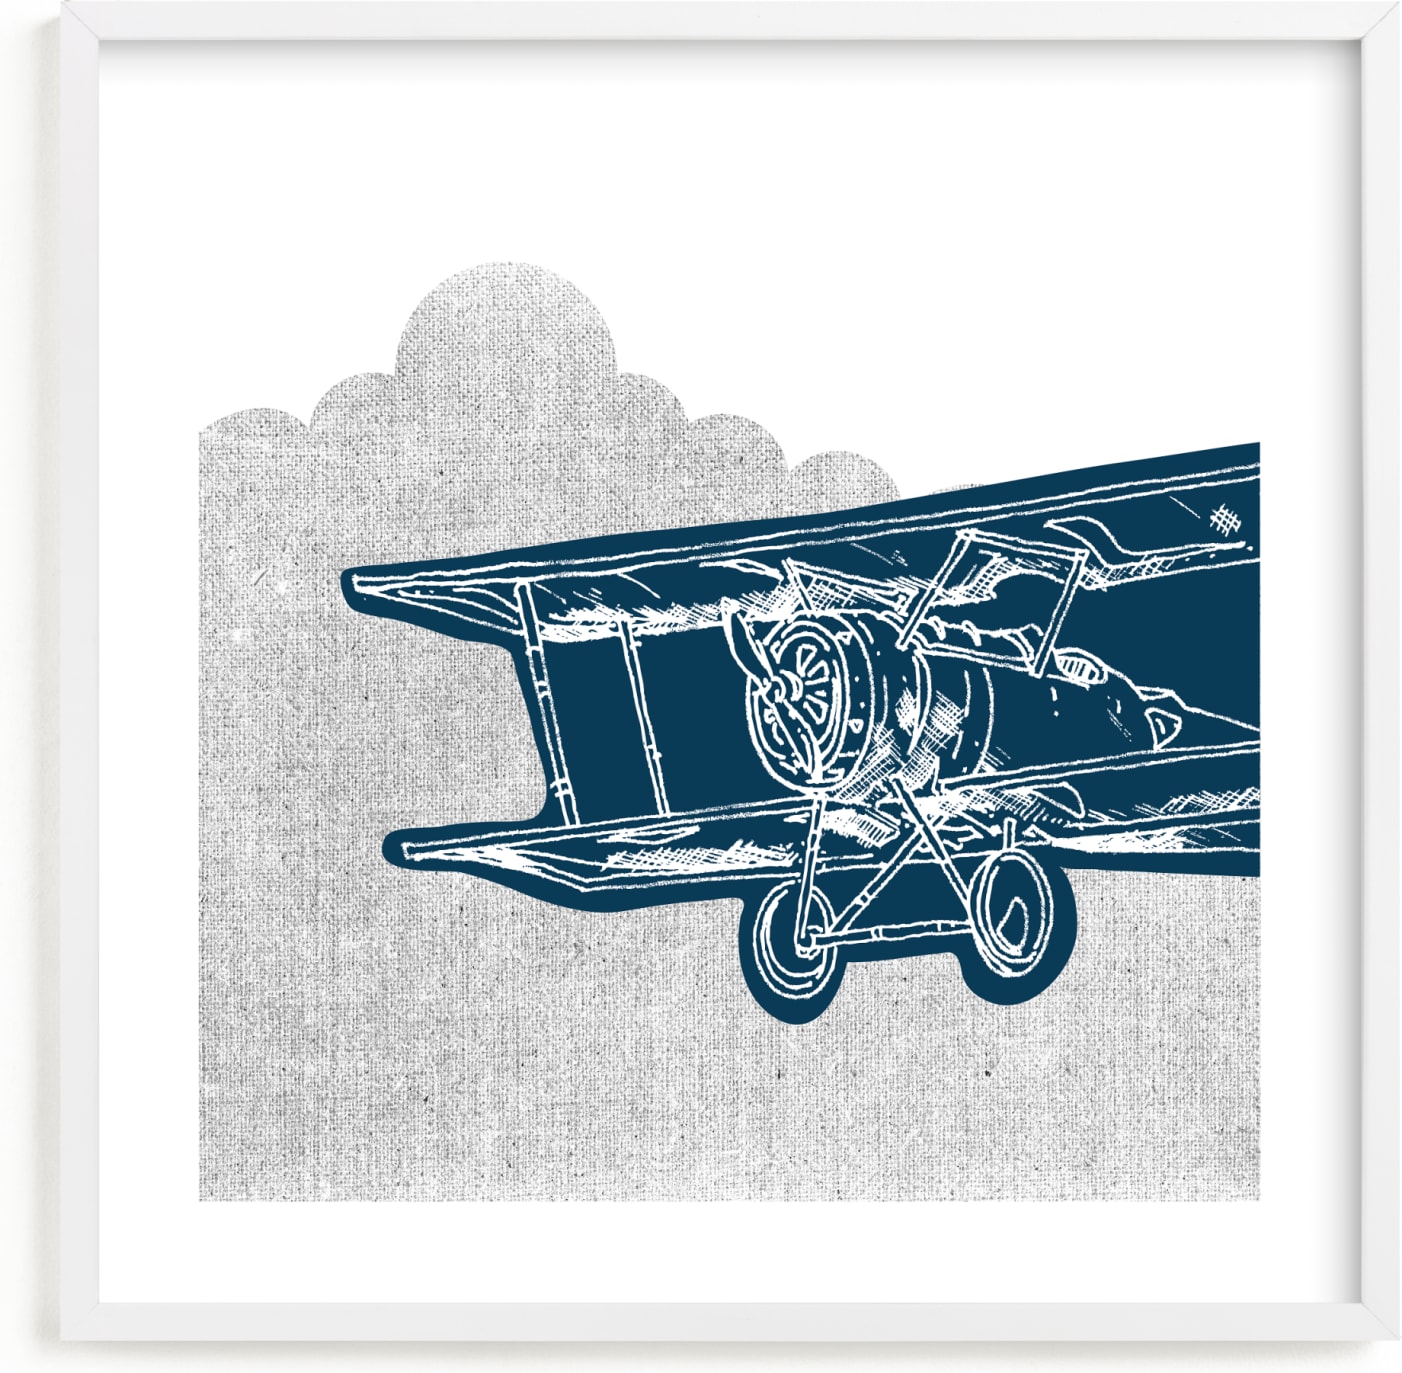 This is a blue kids wall art by Saksun called Vintage plane.